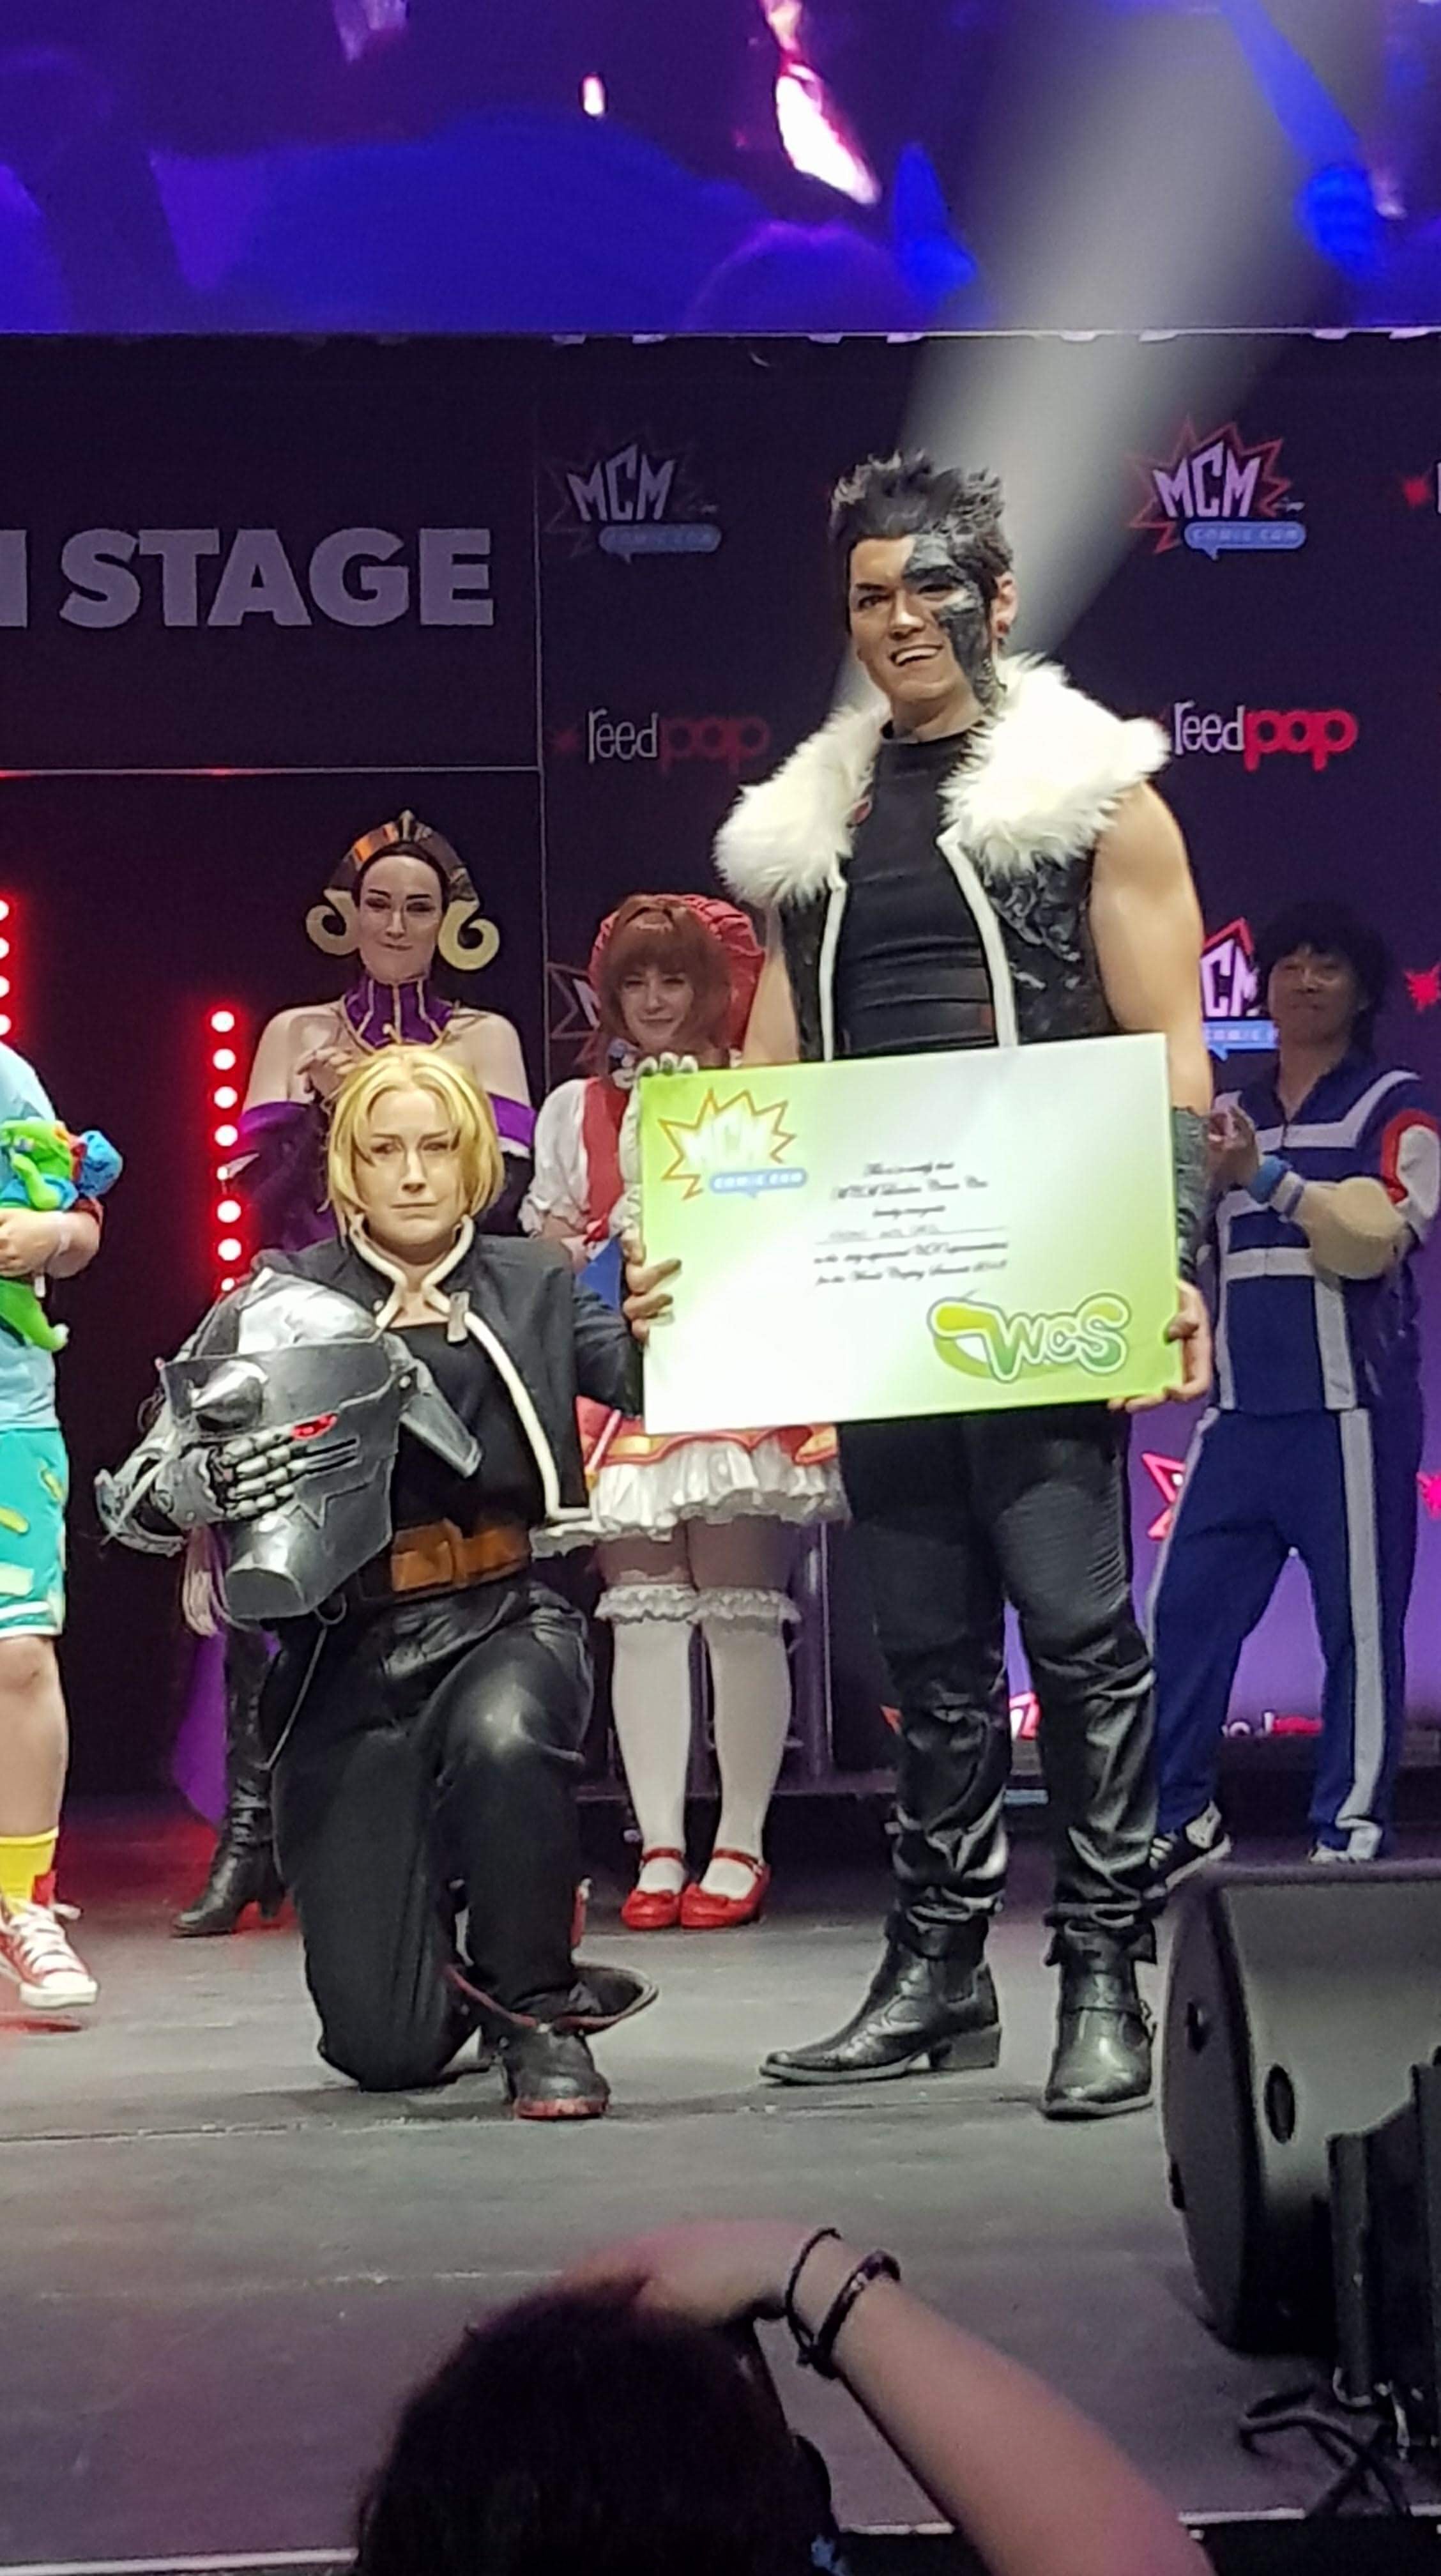 Edward Elric and Greed Cosplay From FullMetal Alchemist Winning The World Cosplay Summit 2018 Qualifier To Go To Japan